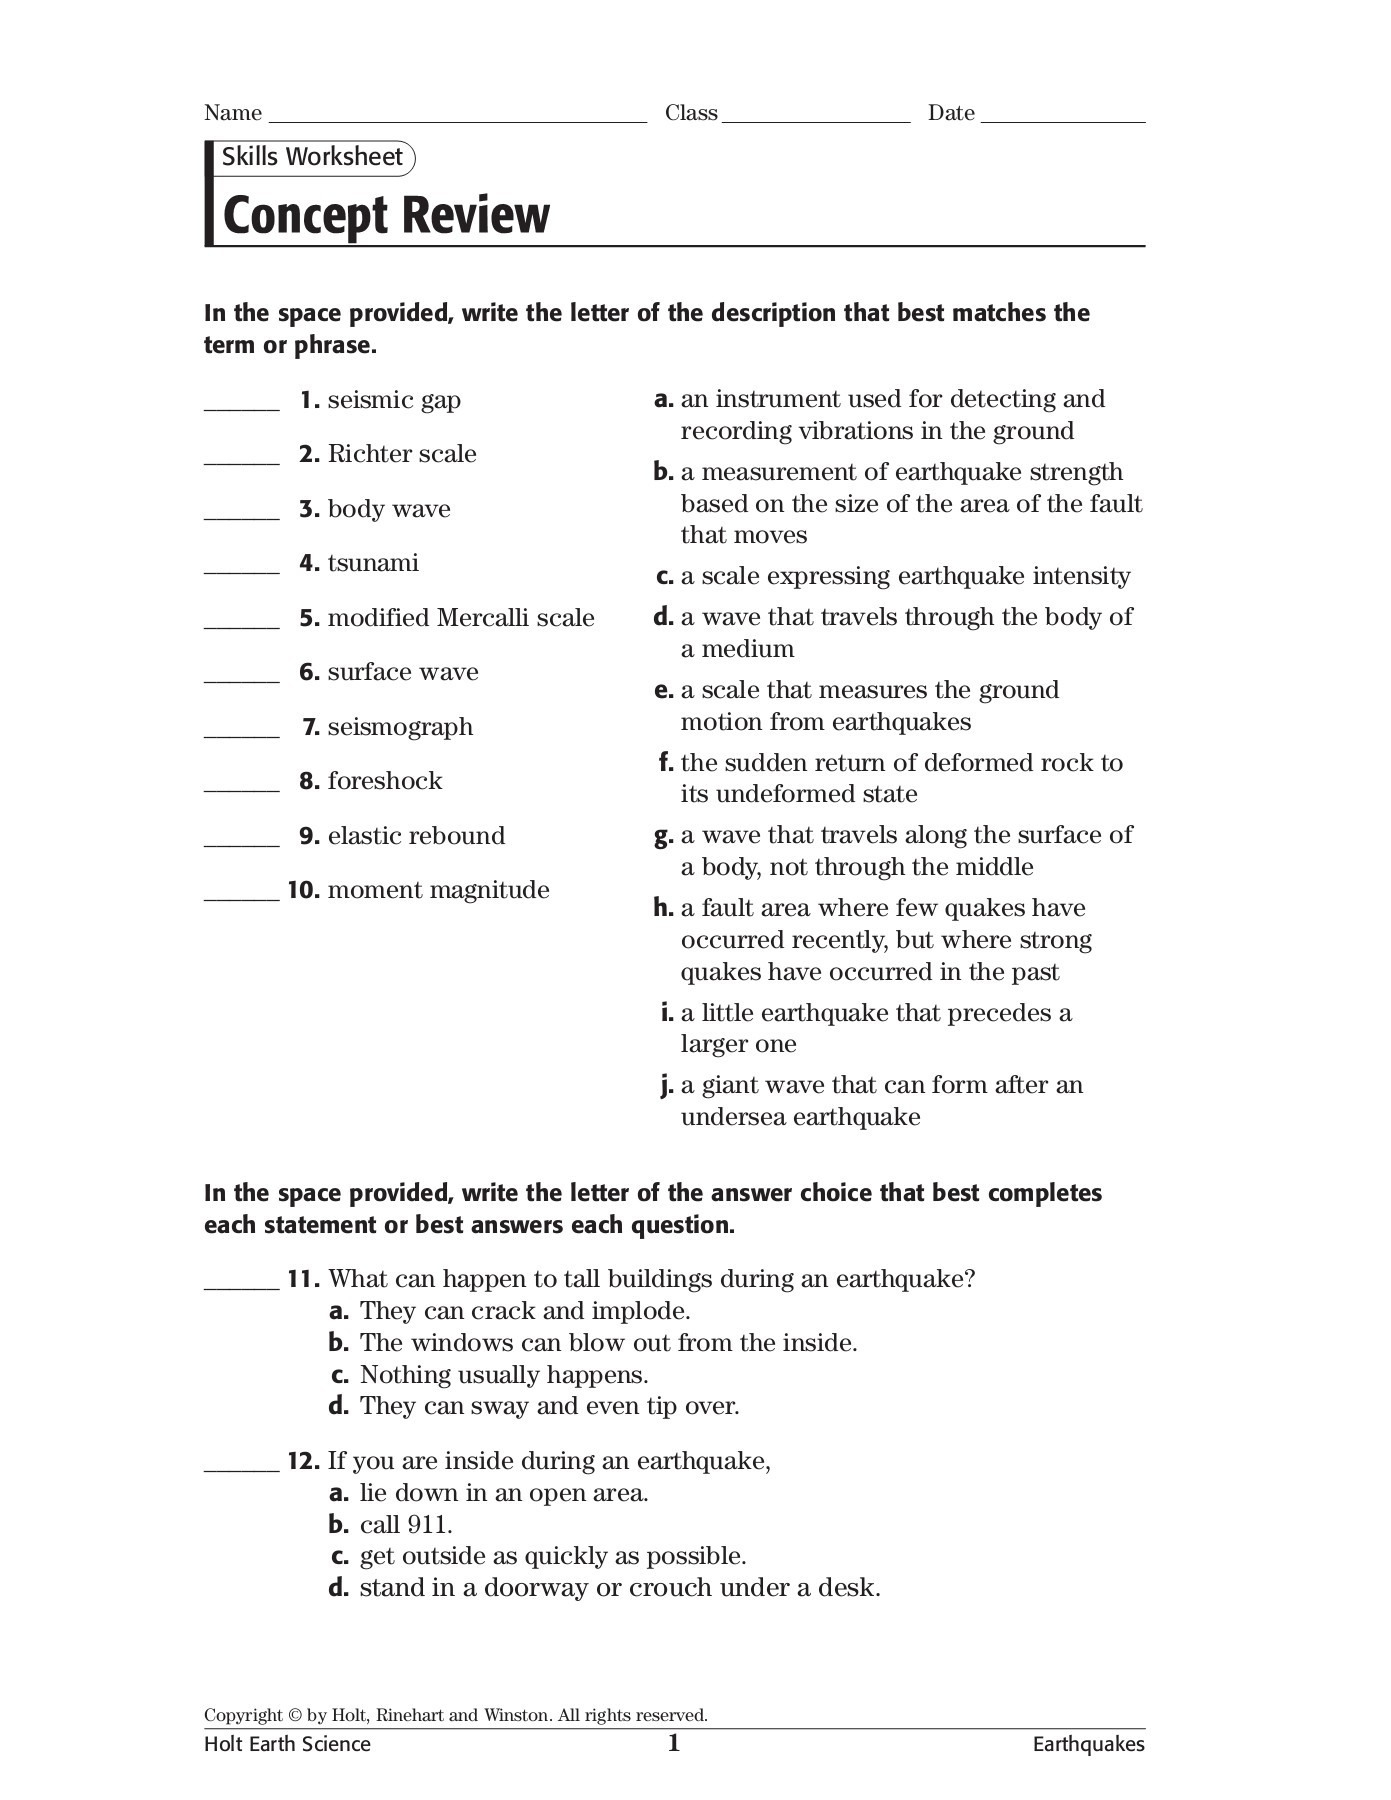 Skills Worksheet Concept Review Pages 1  3  Text Version